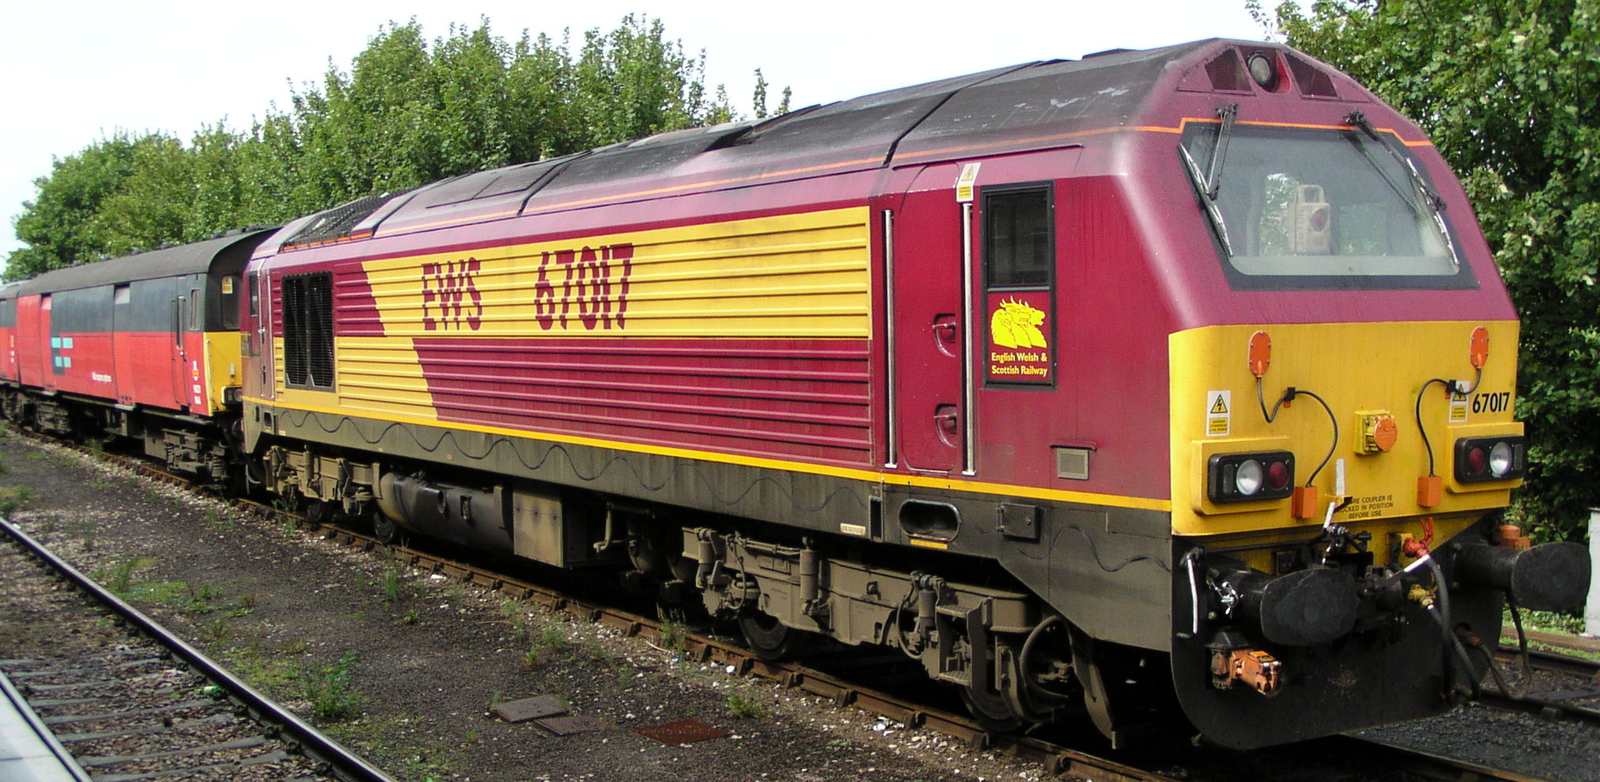 EWS 67017 “Arrow” in August 2003 at Plymouth